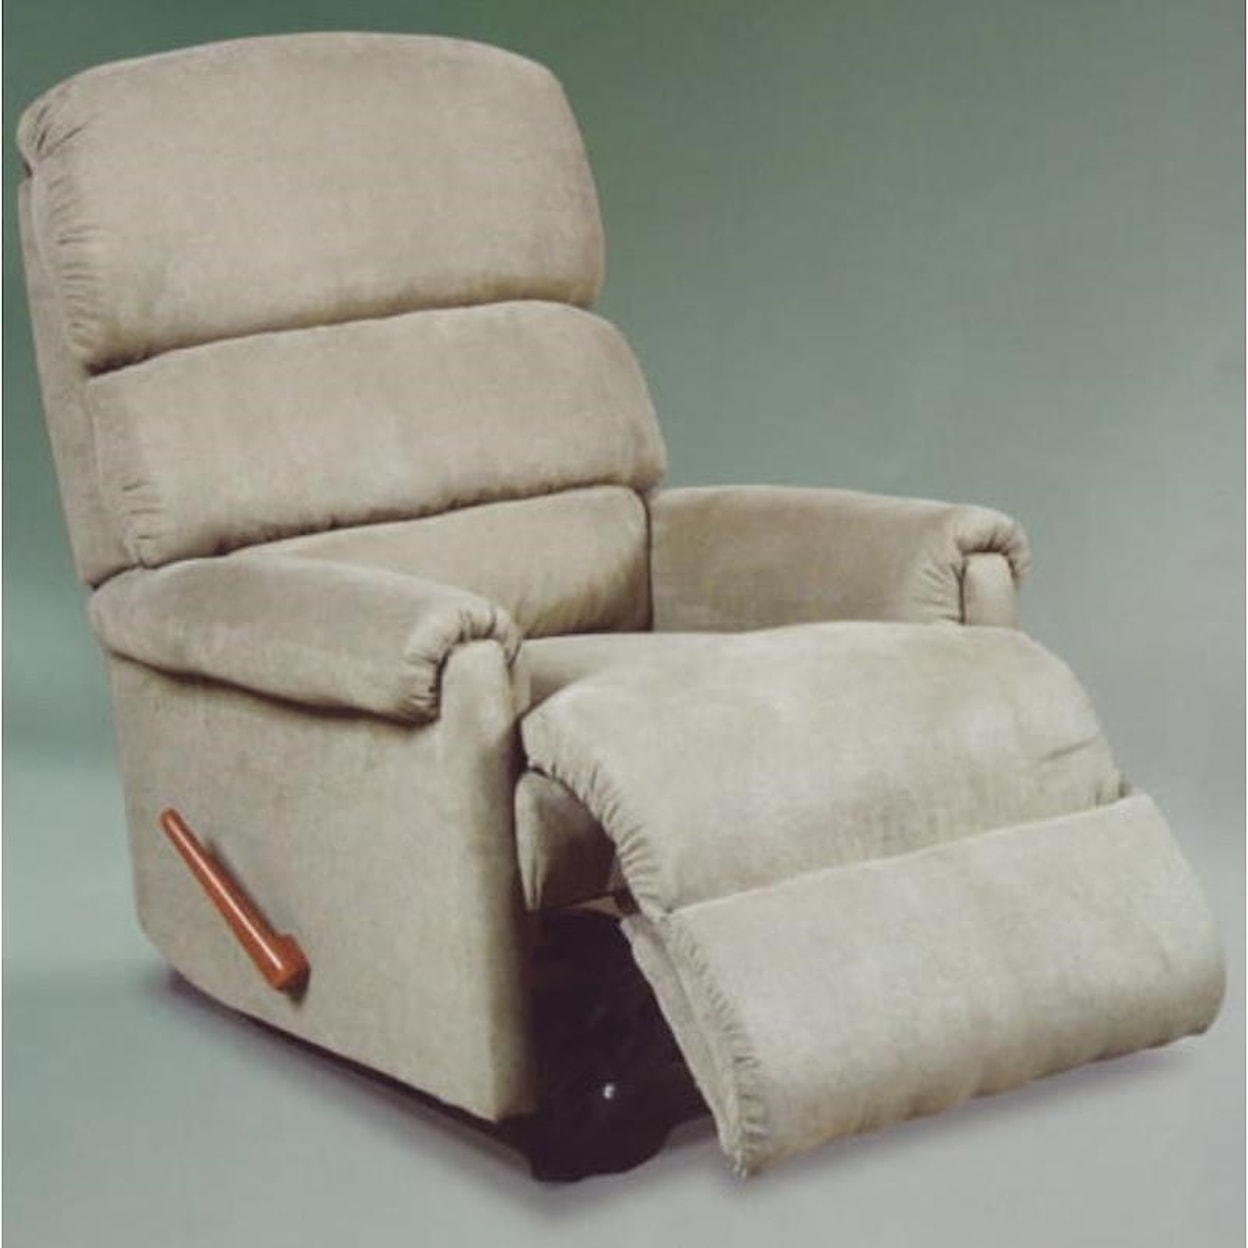 Ort Manufacturing Handle Recliner Chaise Swivel Rocker Recliner